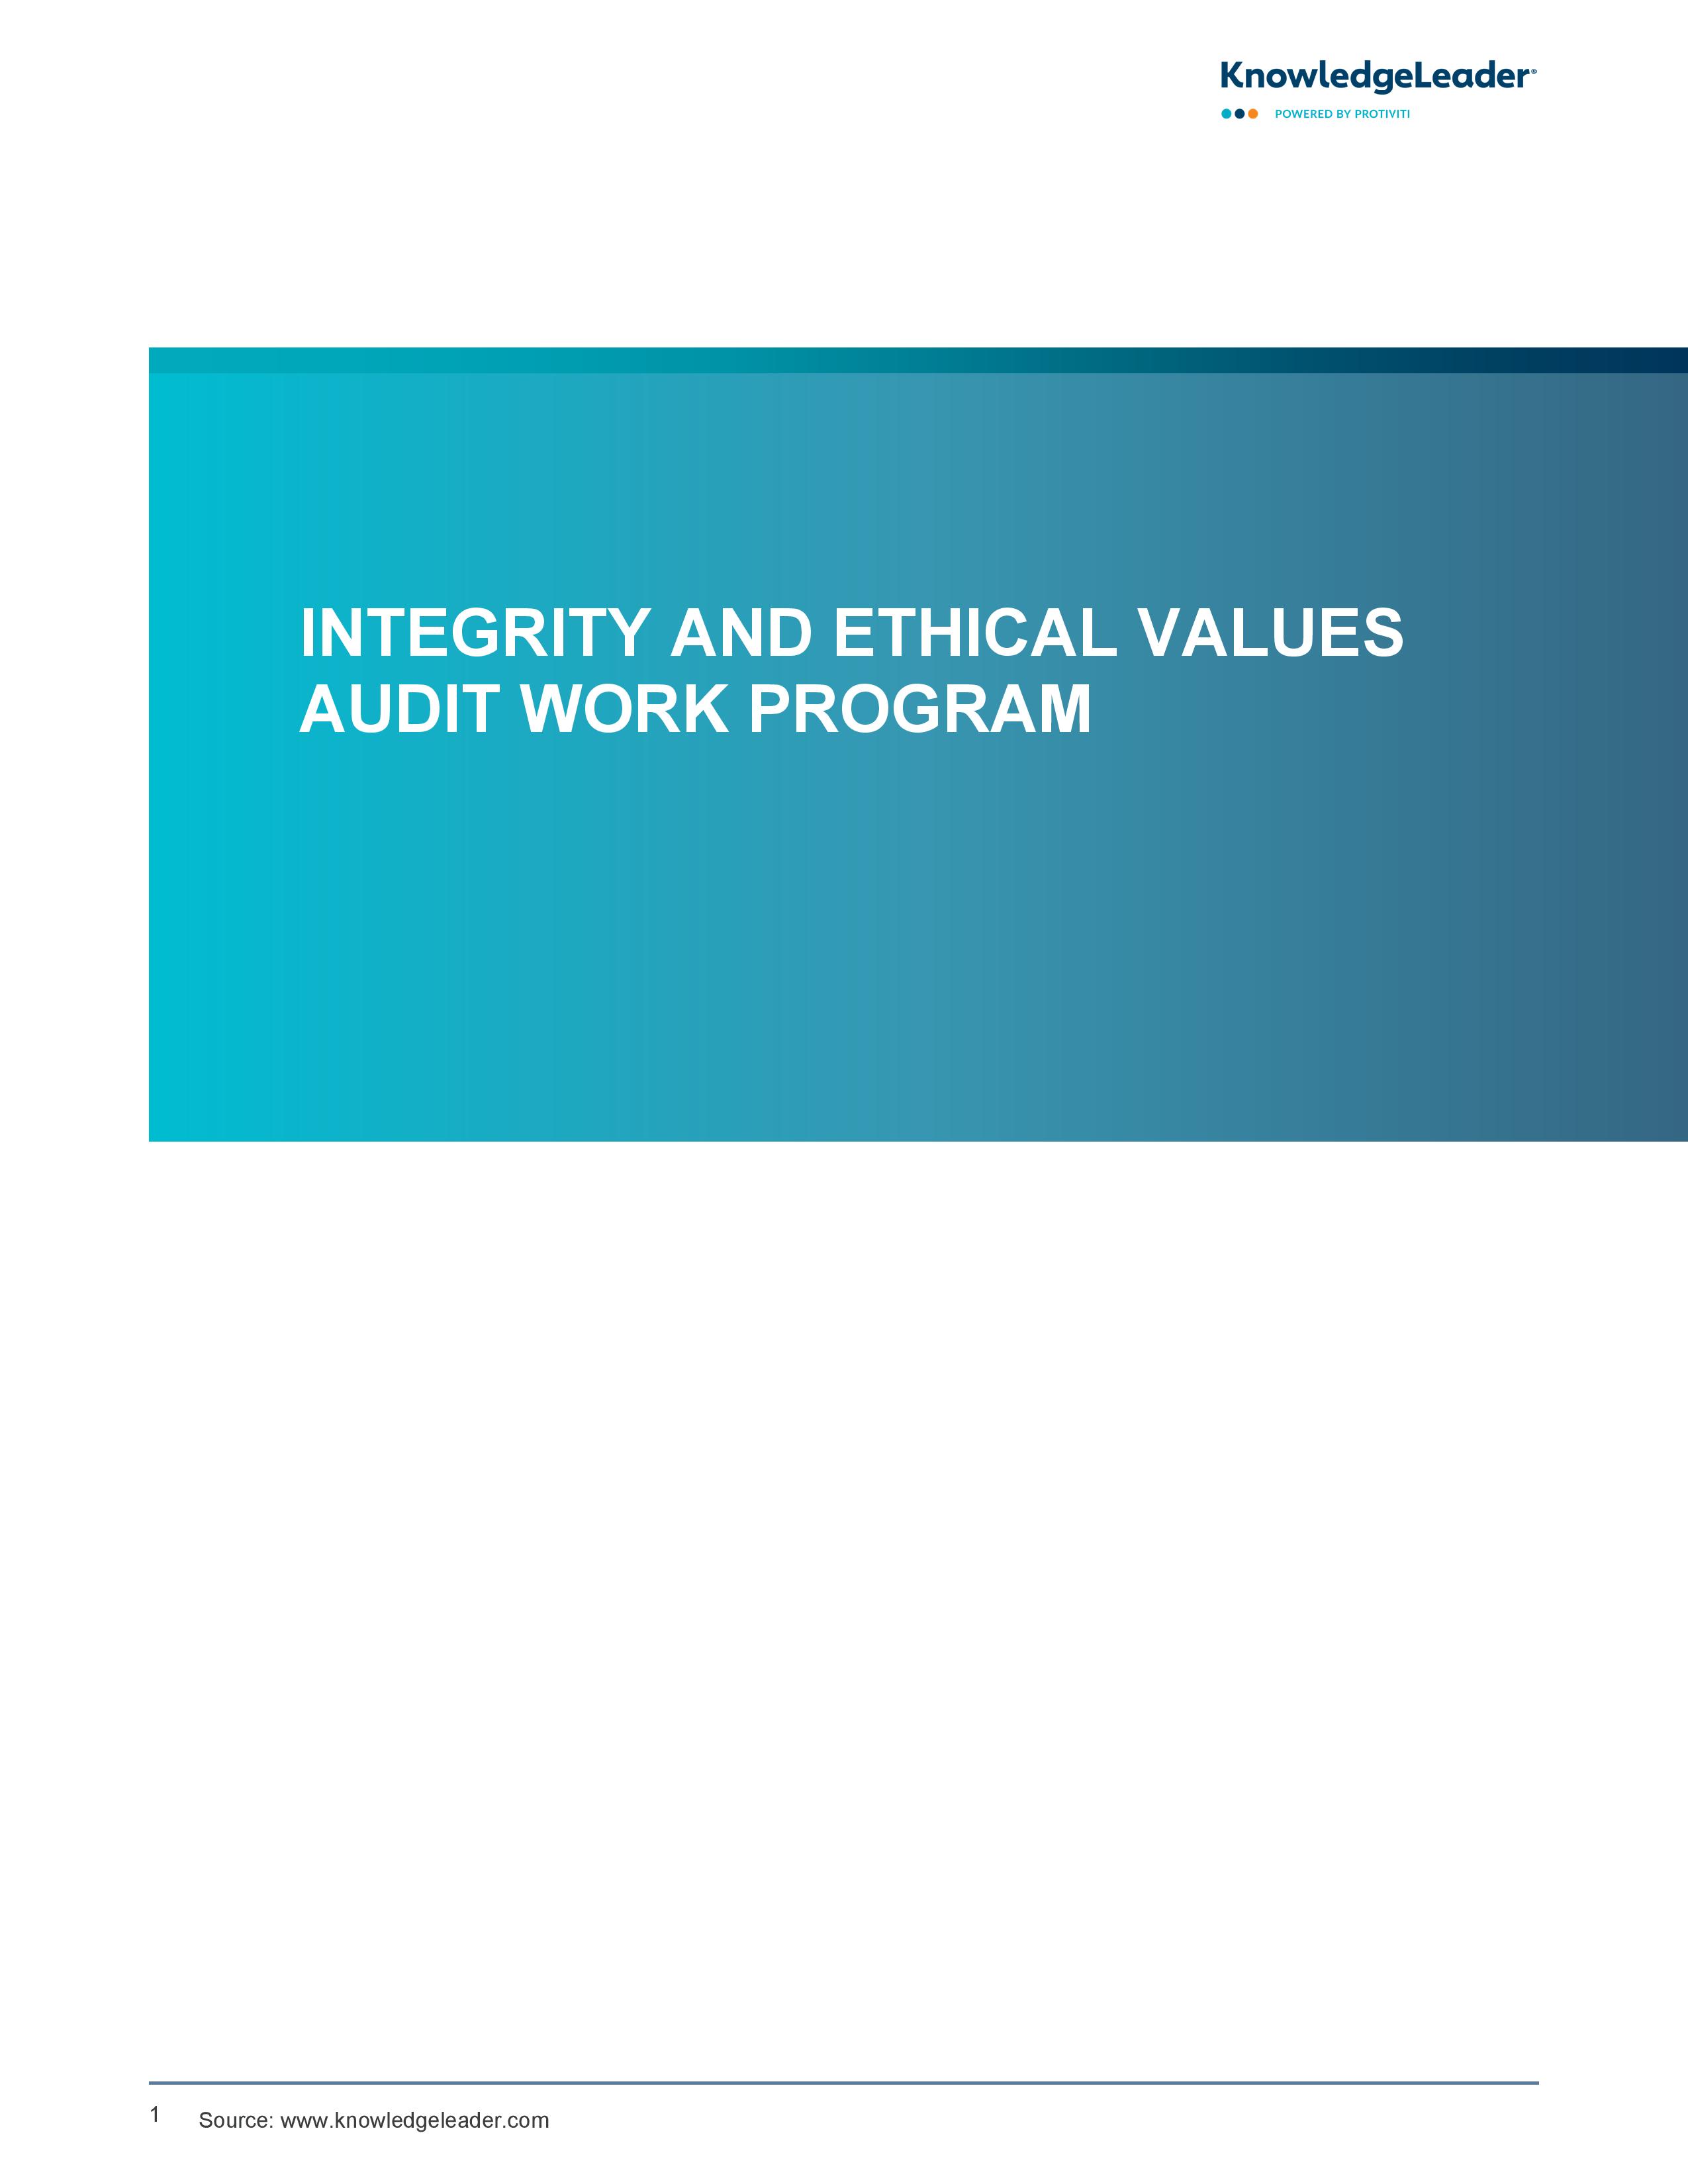 screenshot of the first page of Integrity and Ethical Values Audit Work Program